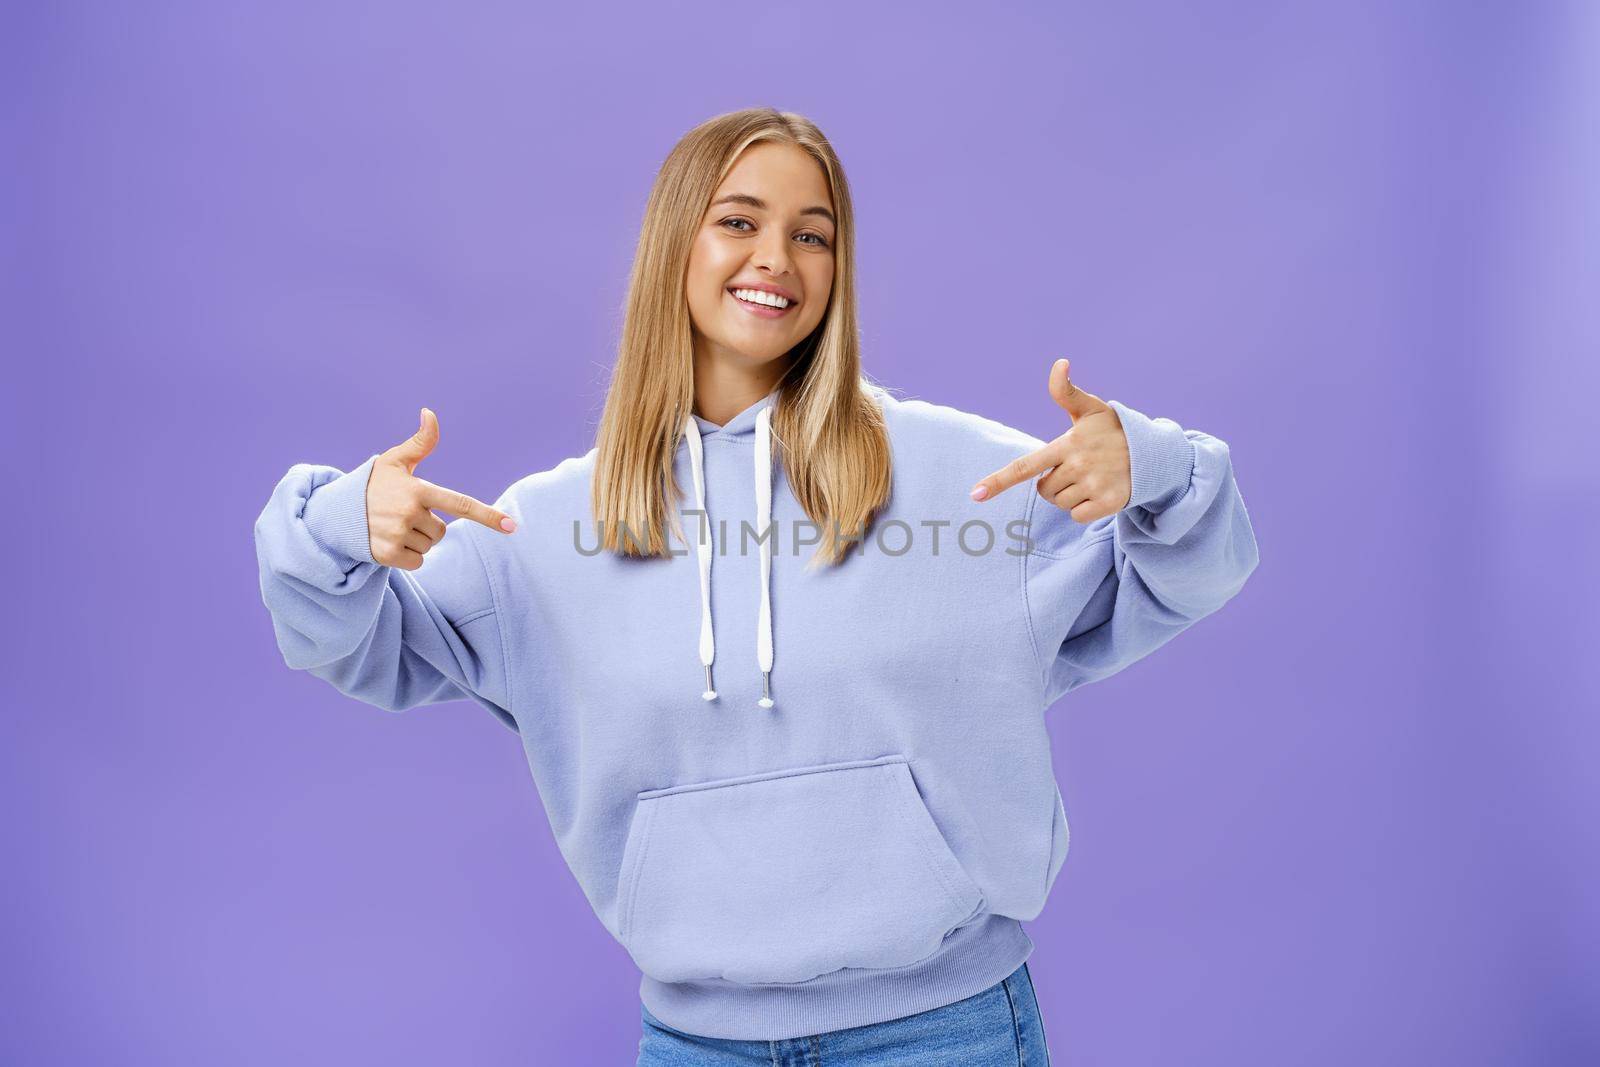 Self-assured cheerful carefree young girl with tanned skin and fair hair pointing proudly at herself bragging about own skills and achievements standing cool feeling awesome in new hoodie. Body language and attitude concept